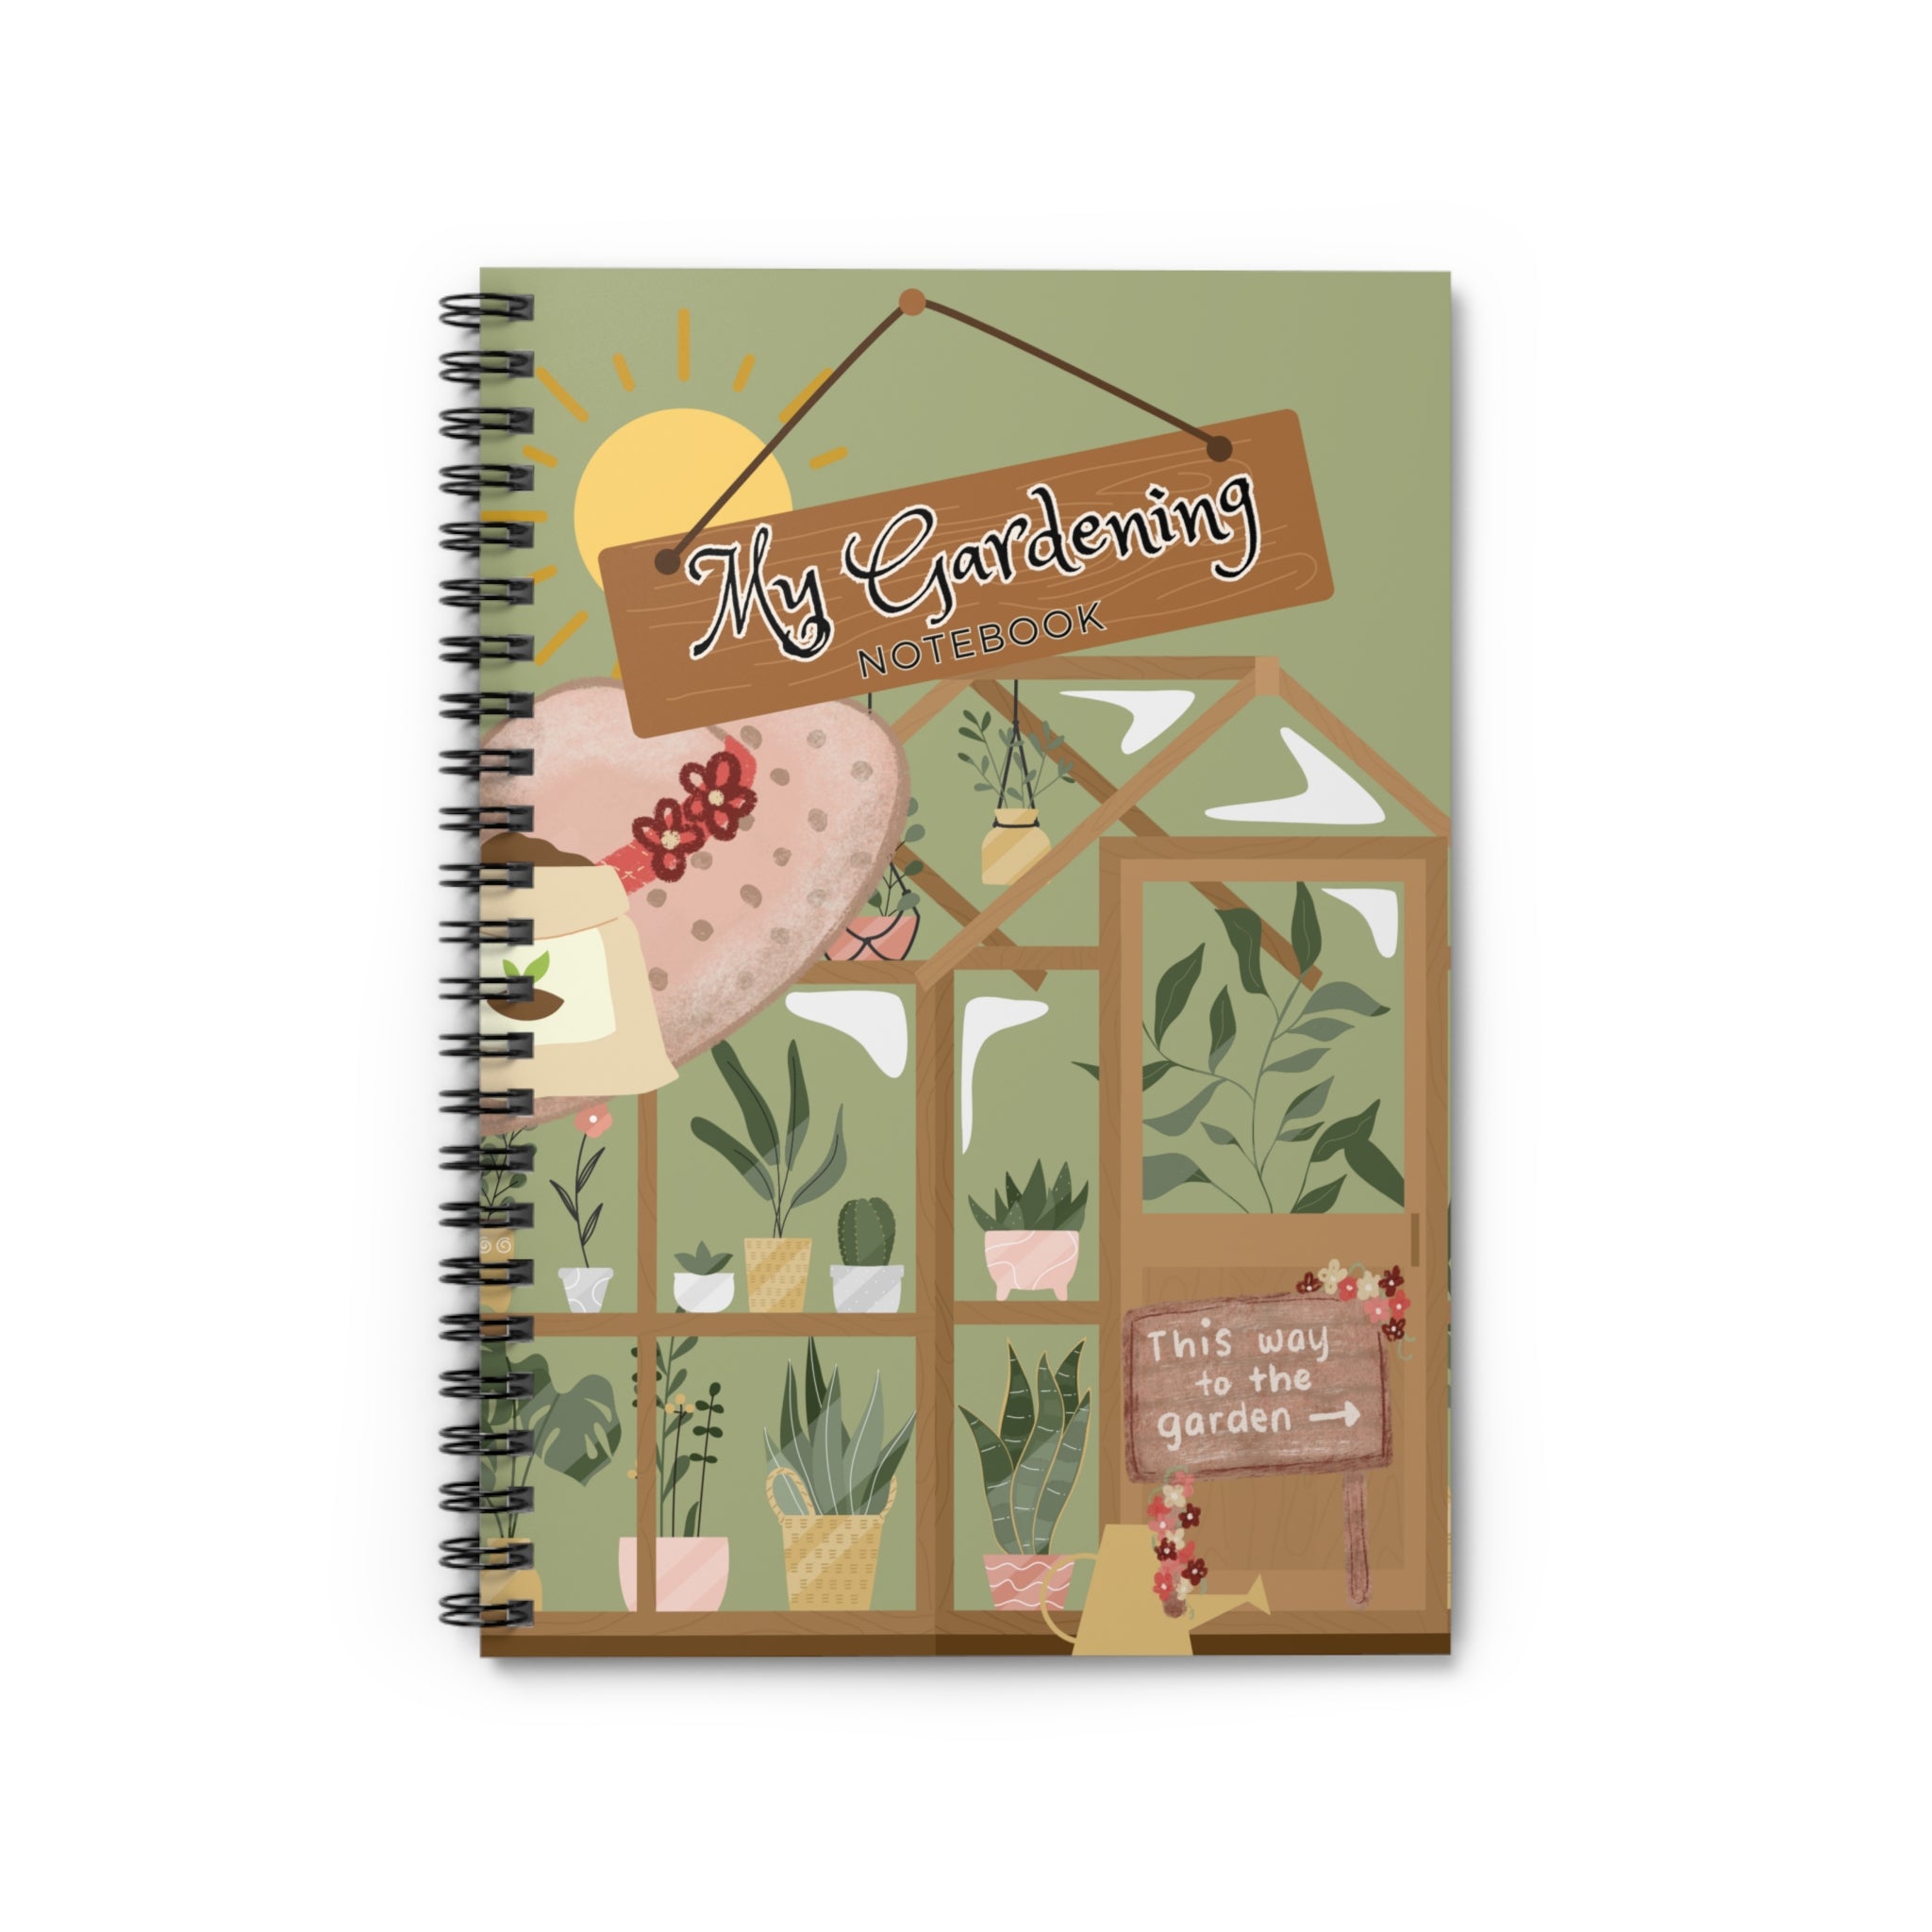 My Gardening Spiral Notebook - Ruled Line Paper products Krazy Heart Designs Boutique   